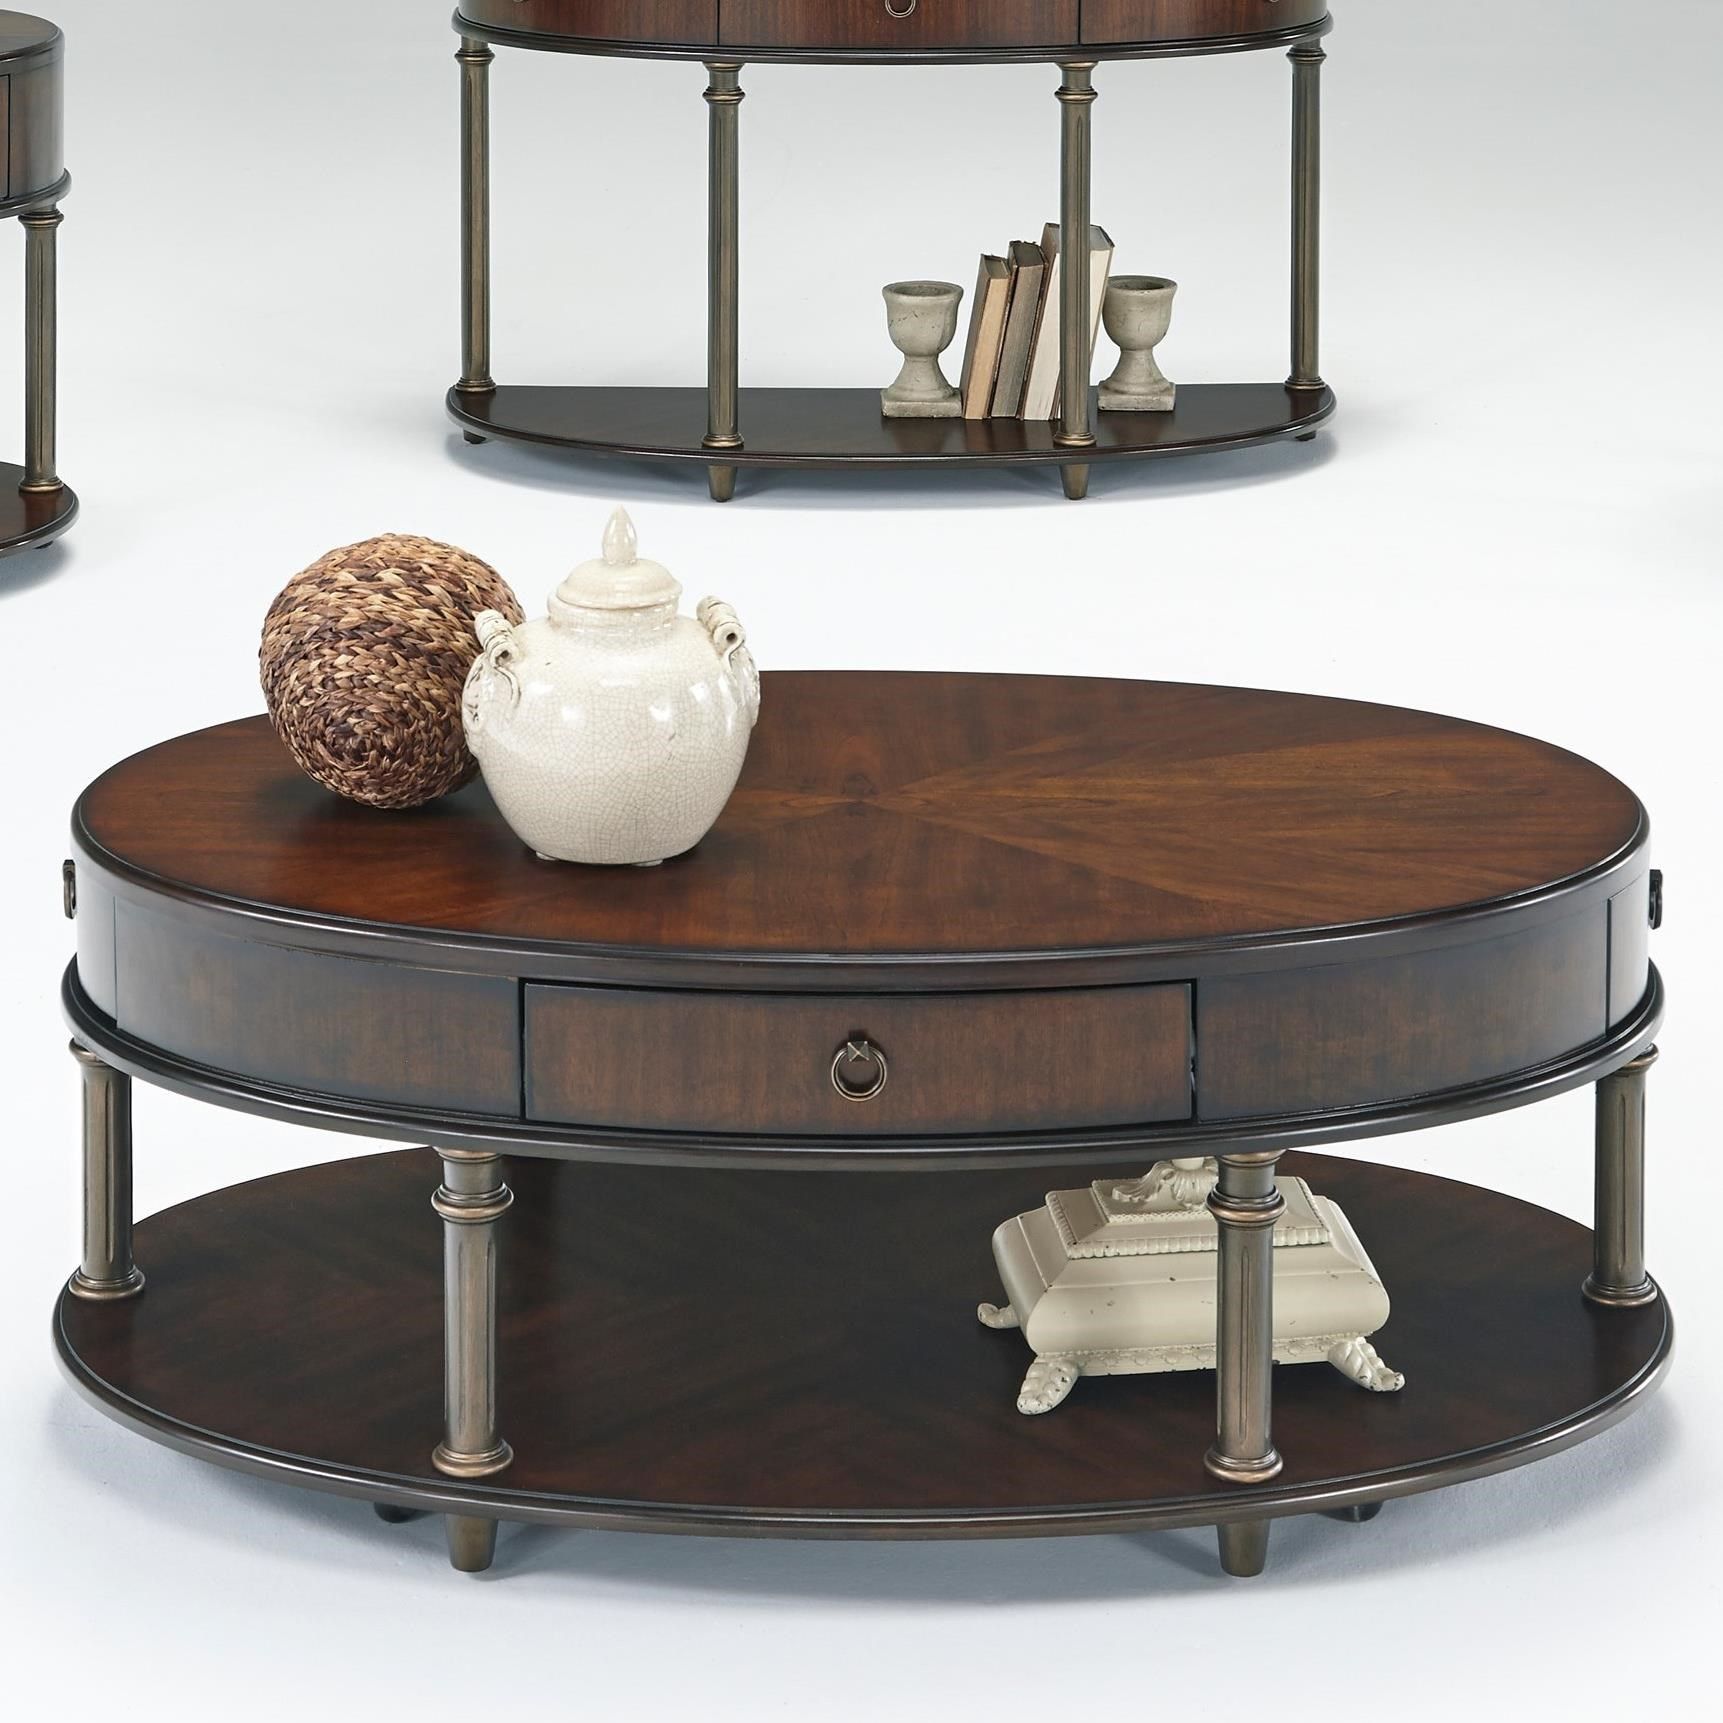 Progressive Furniture Regent Court Castered Oval Cocktail Table | Lindy With Progressive Furniture Cocktail Tables (View 9 of 20)